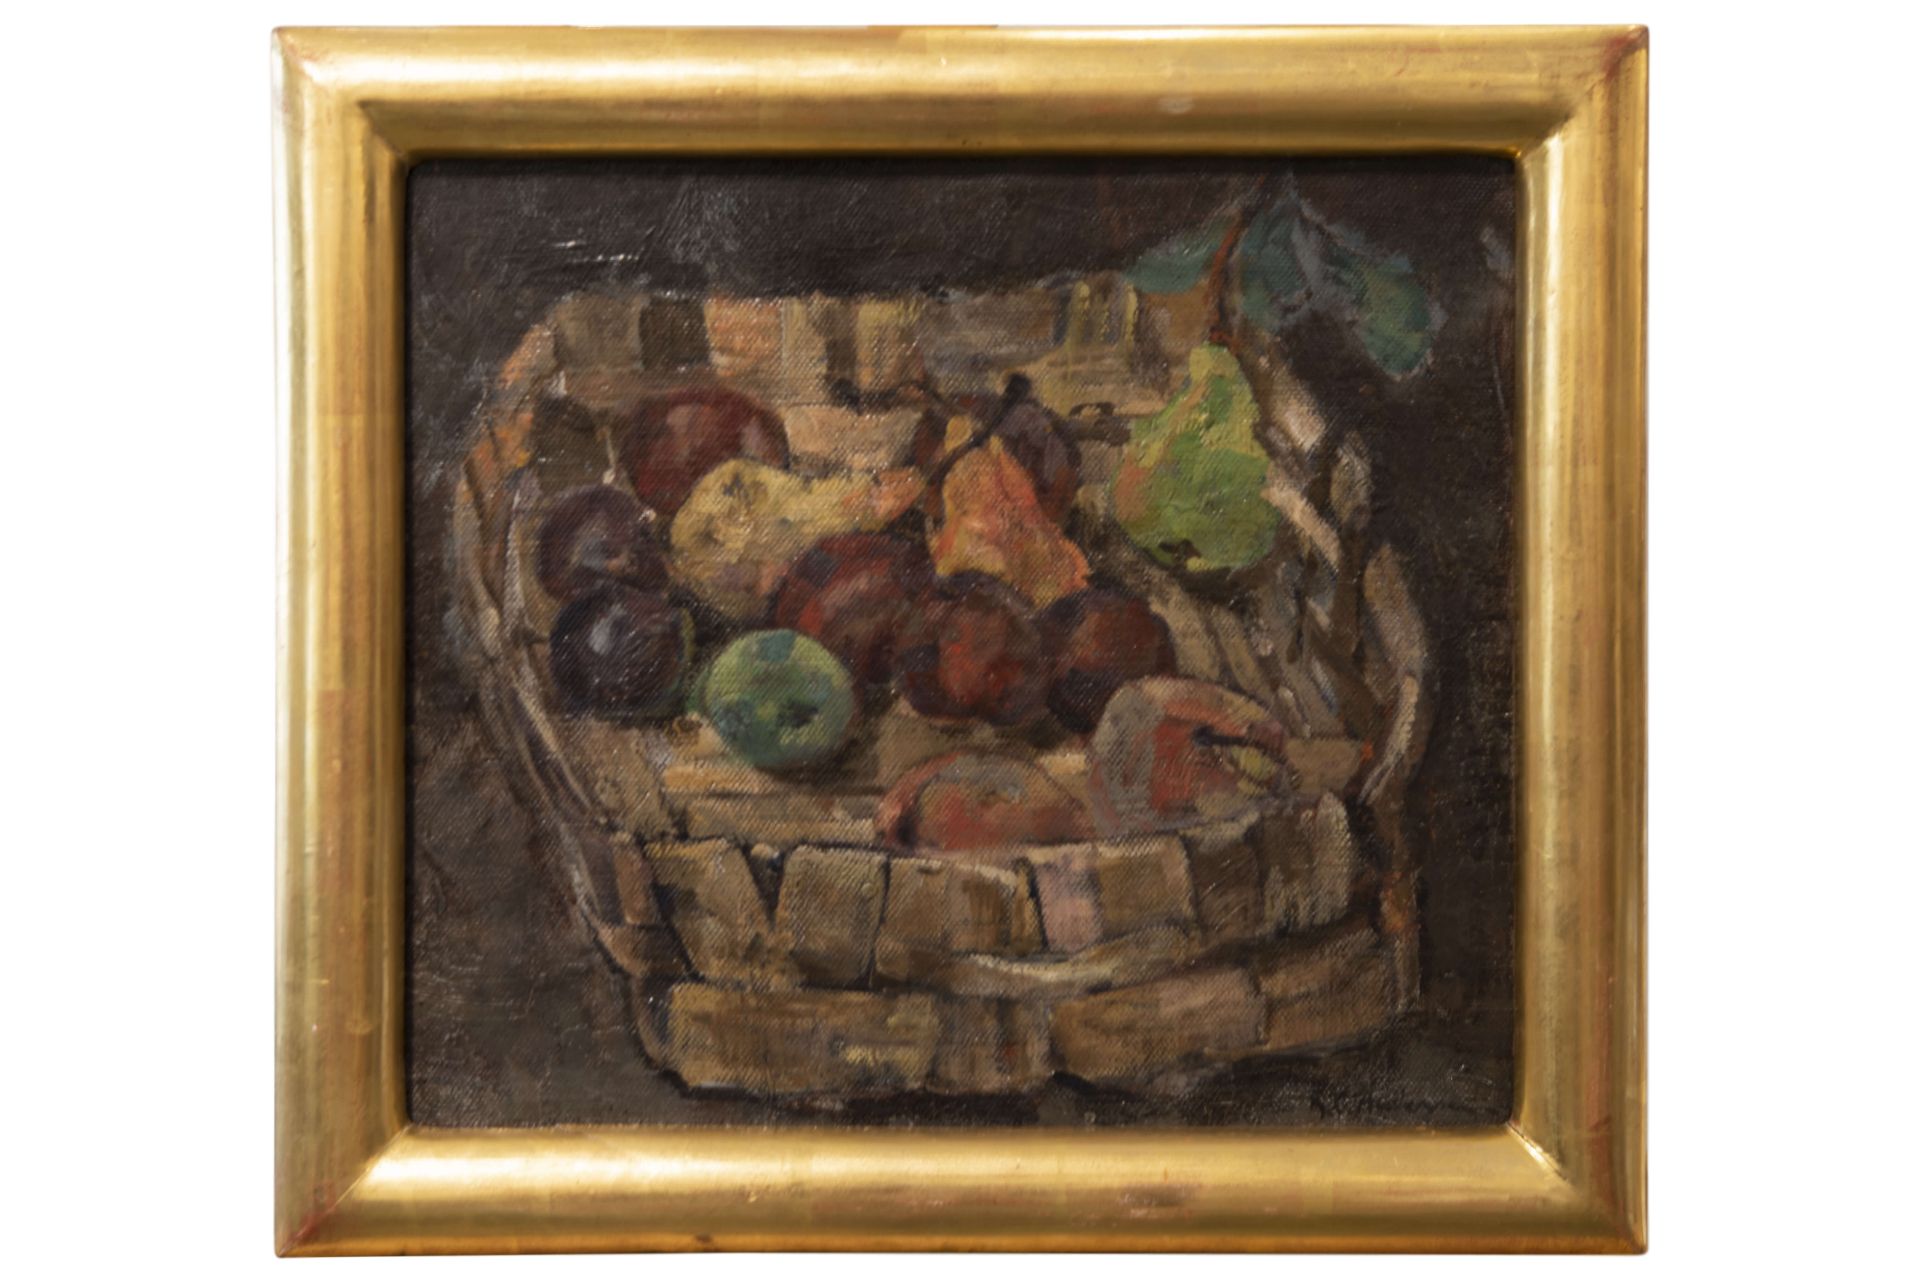 Robin Christian Anderson 1890-1969 Obstschale | Robin Christian Anderson 1890-1969 fruit bowl